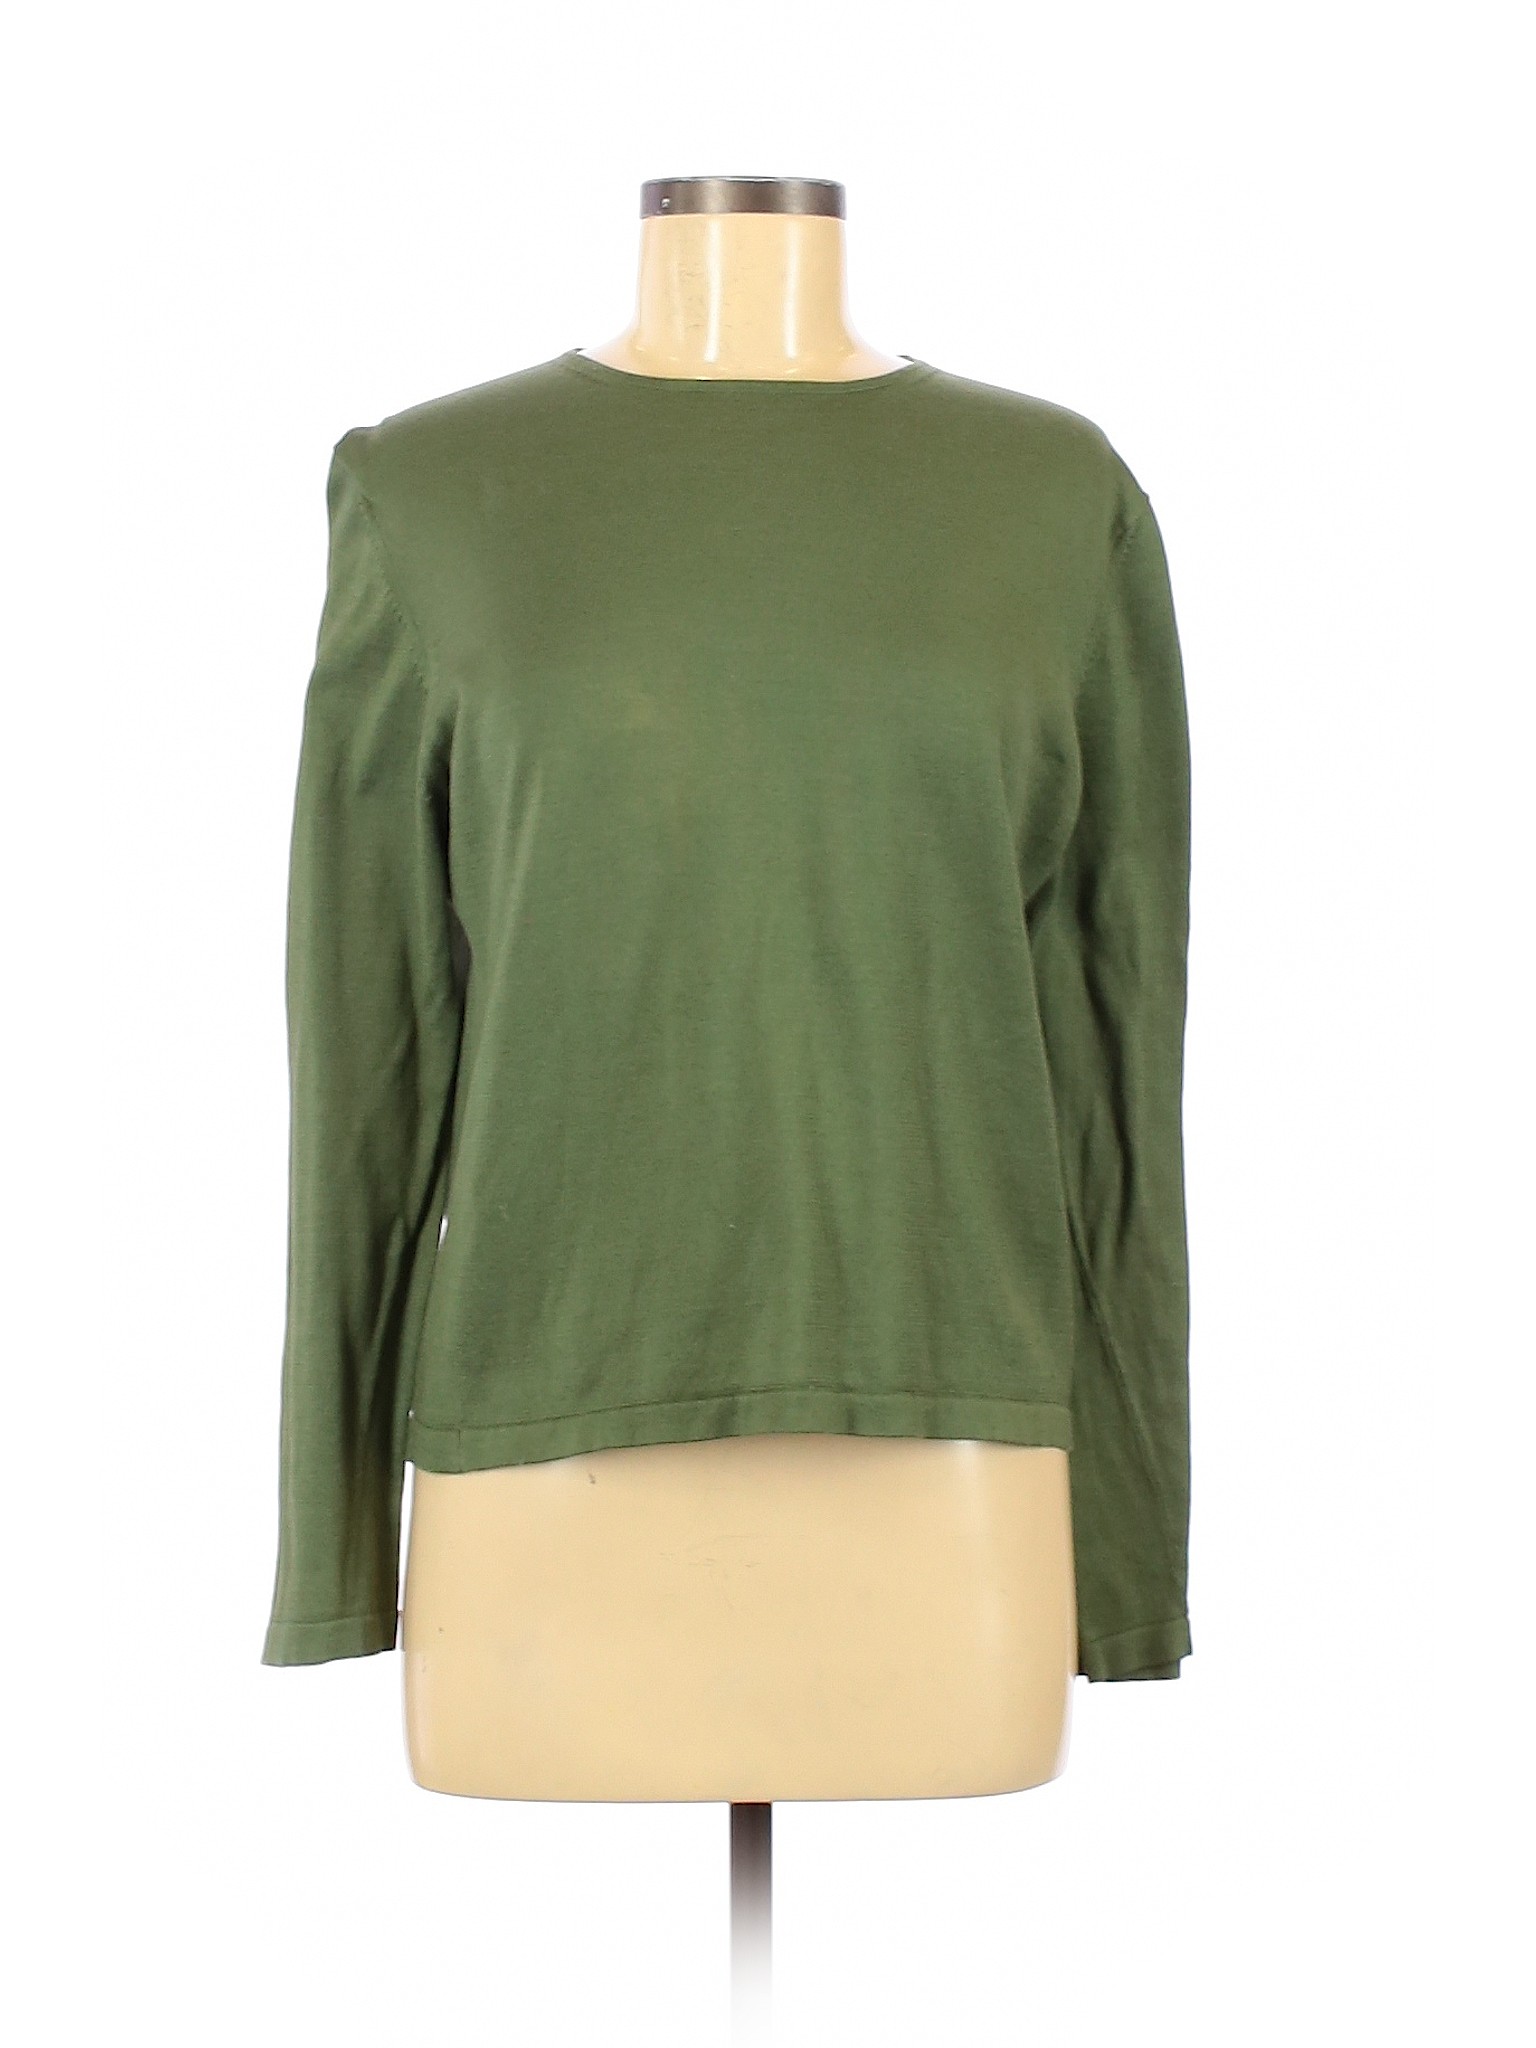 F. by Faconnable Women Green Long Sleeve T-Shirt M | eBay